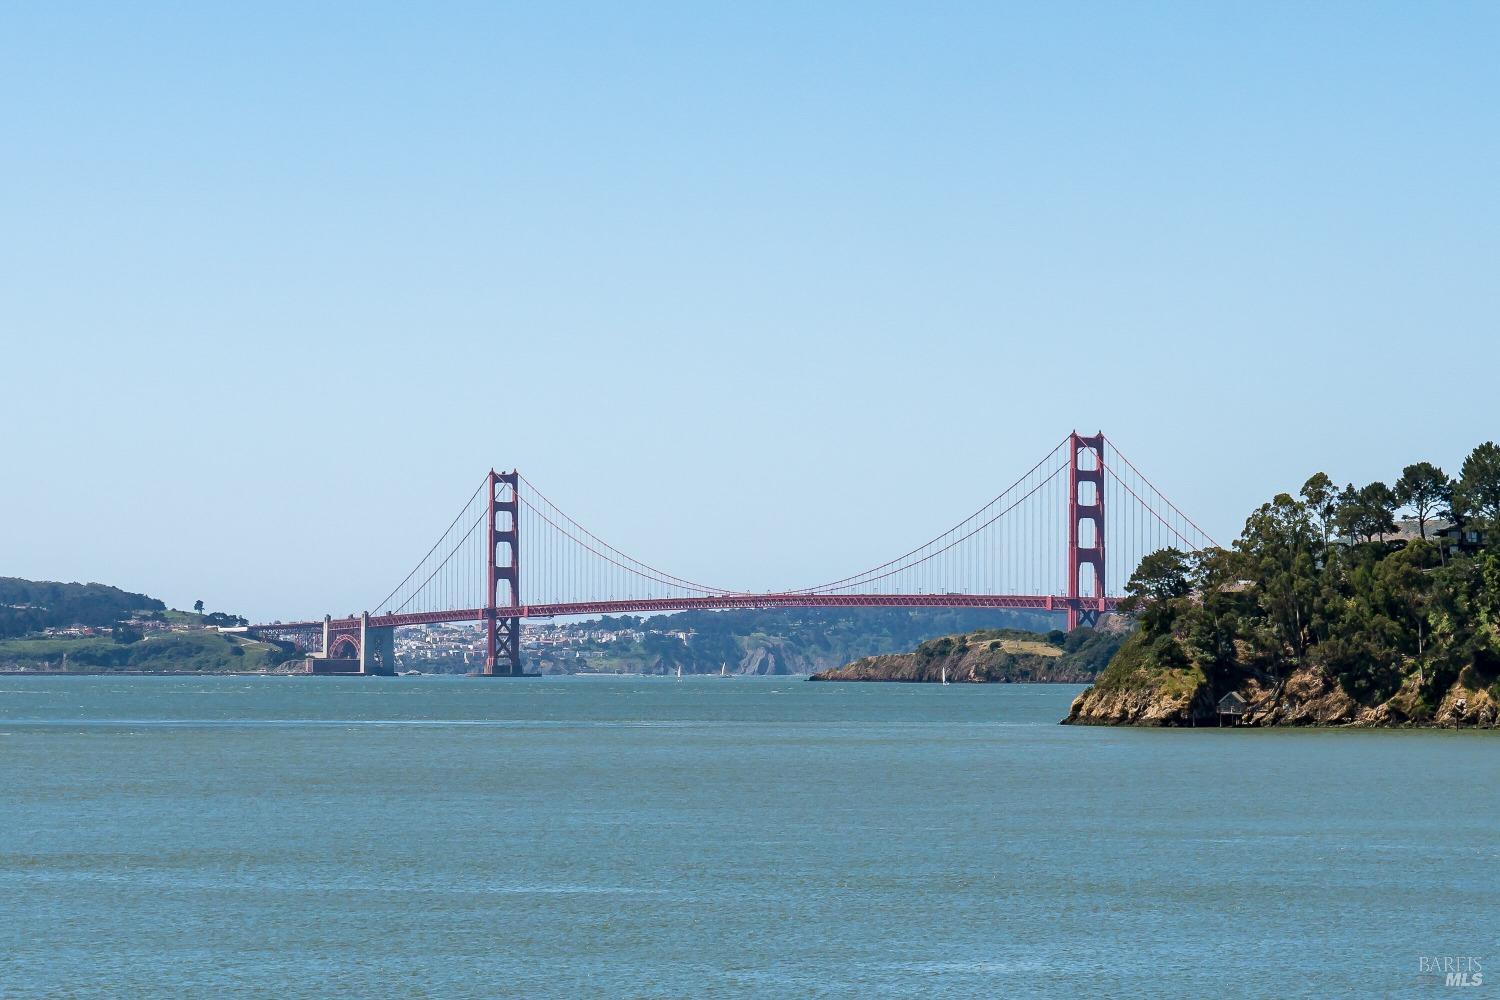 a view of a ocean with a large bridge